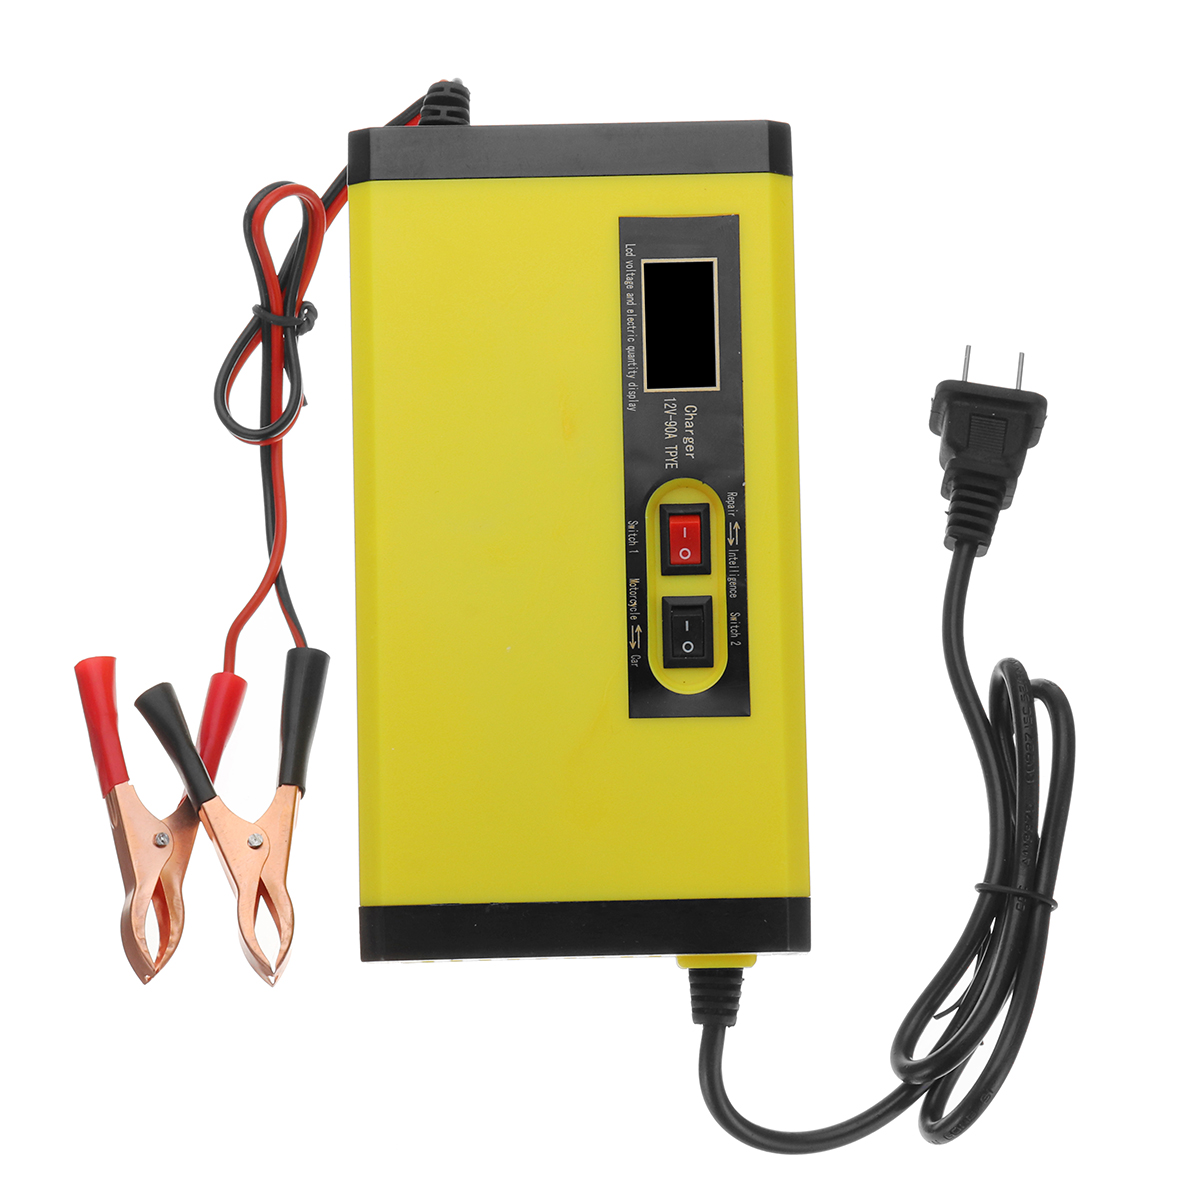 DC-12V-8A-Pulse-Repair-Battery-Charger-For-Car-Motorcycle-AGM-GEL-WET-Lead-Acid-Battery-LCD-1369648-1